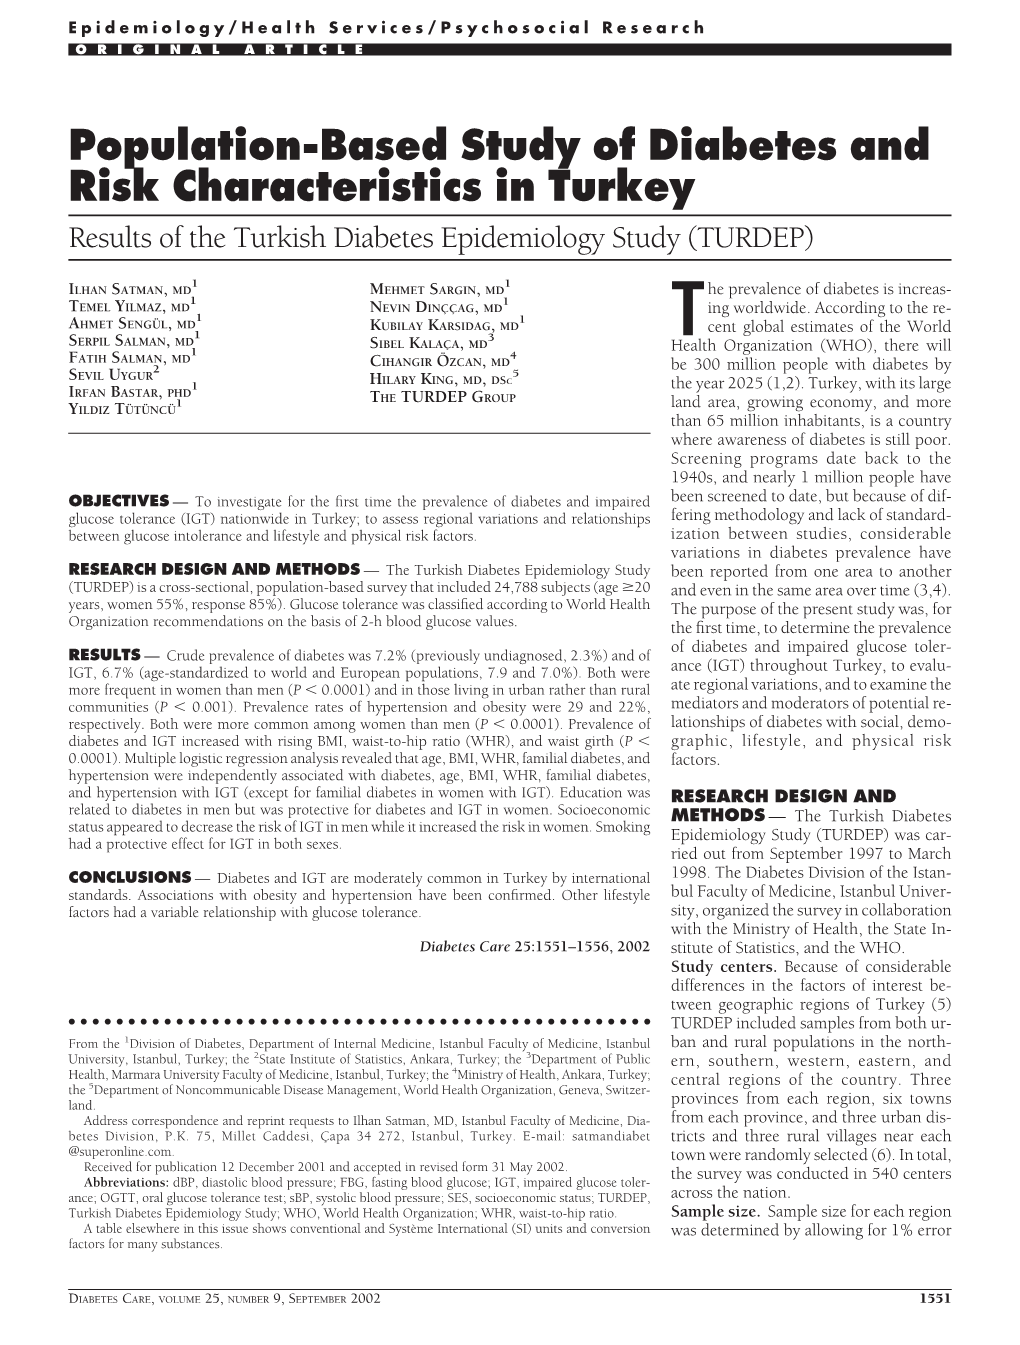 Population-Based Study of Diabetes and Risk Characteristics in Turkey Results of the Turkish Diabetes Epidemiology Study (TURDEP)